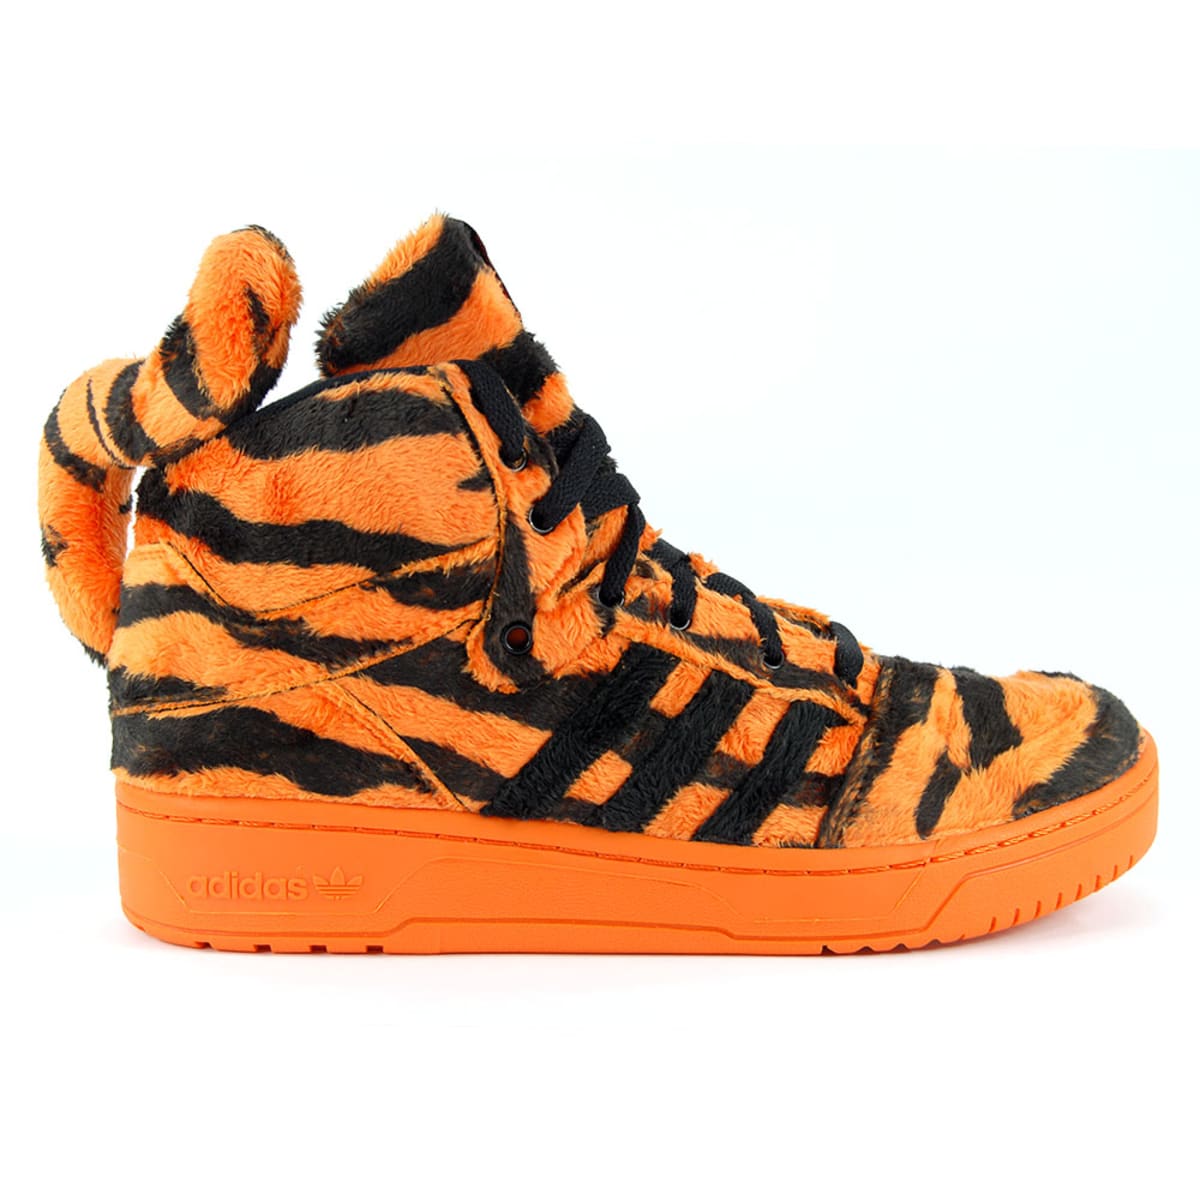 adidas JS Tiger Adidas | Sneaker News, Launches, Release Dates, & Info